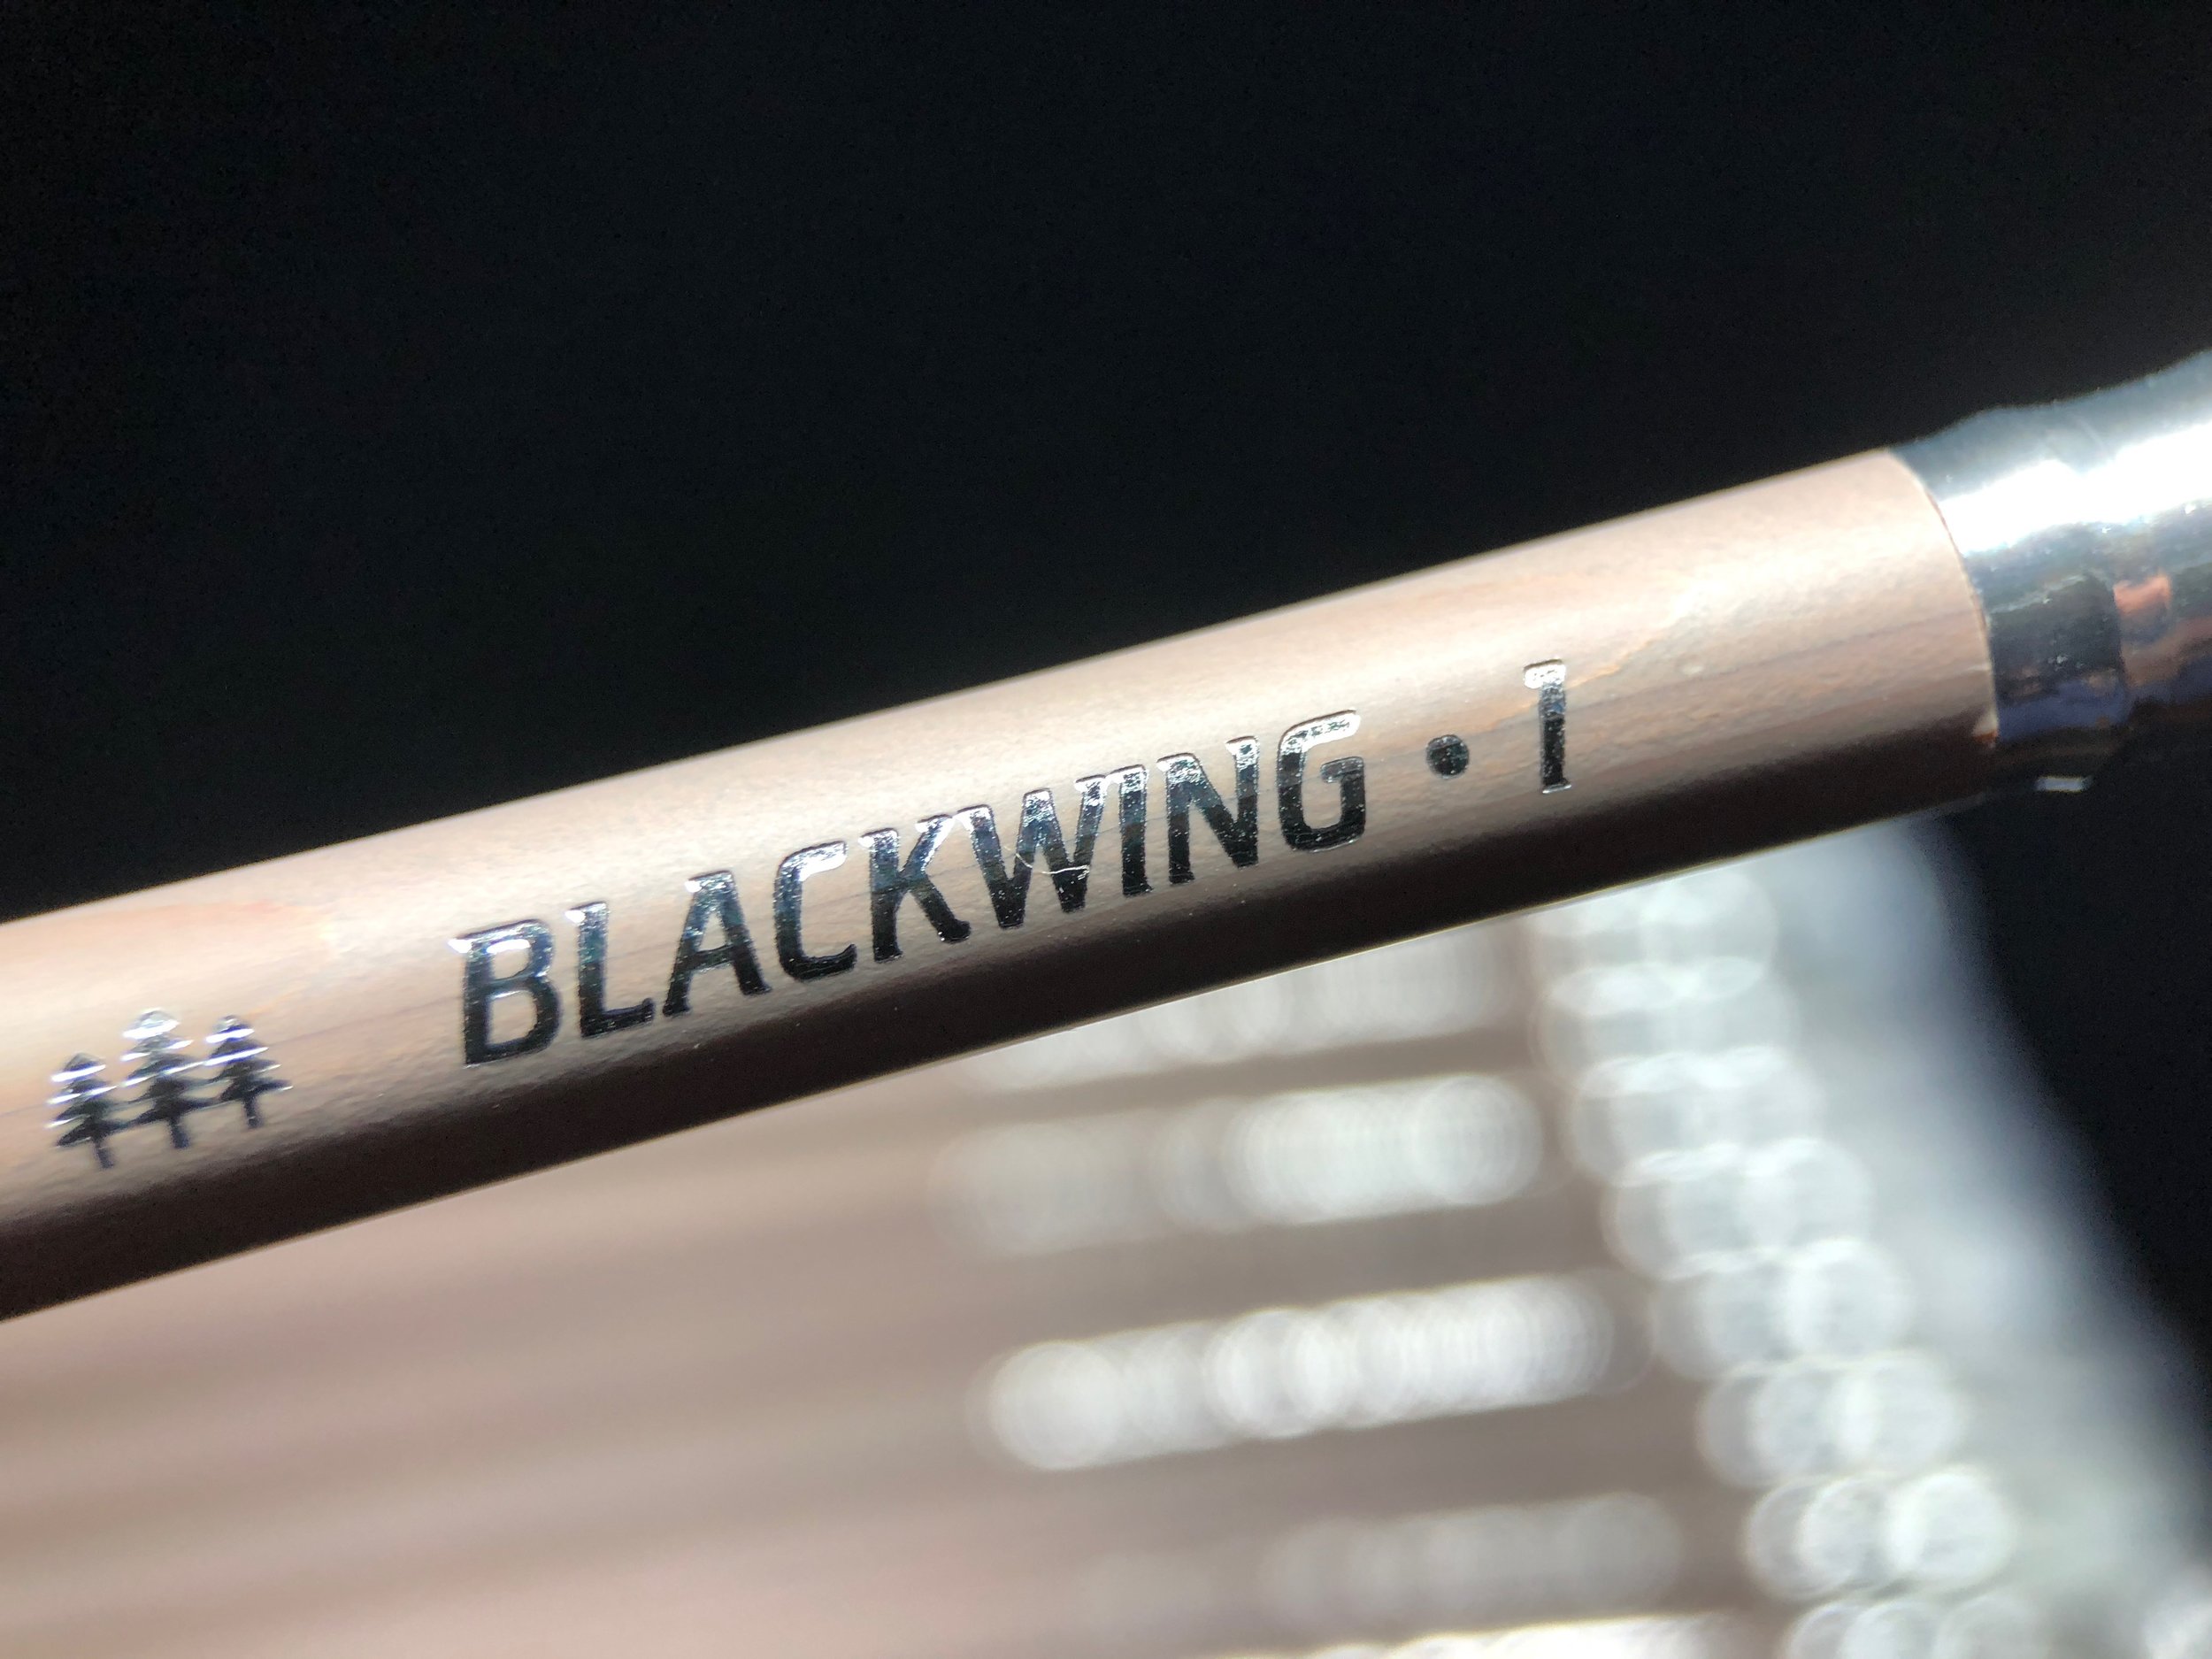 3 Blackwing Volume 1 pencils Guy Clark Box Not Included 